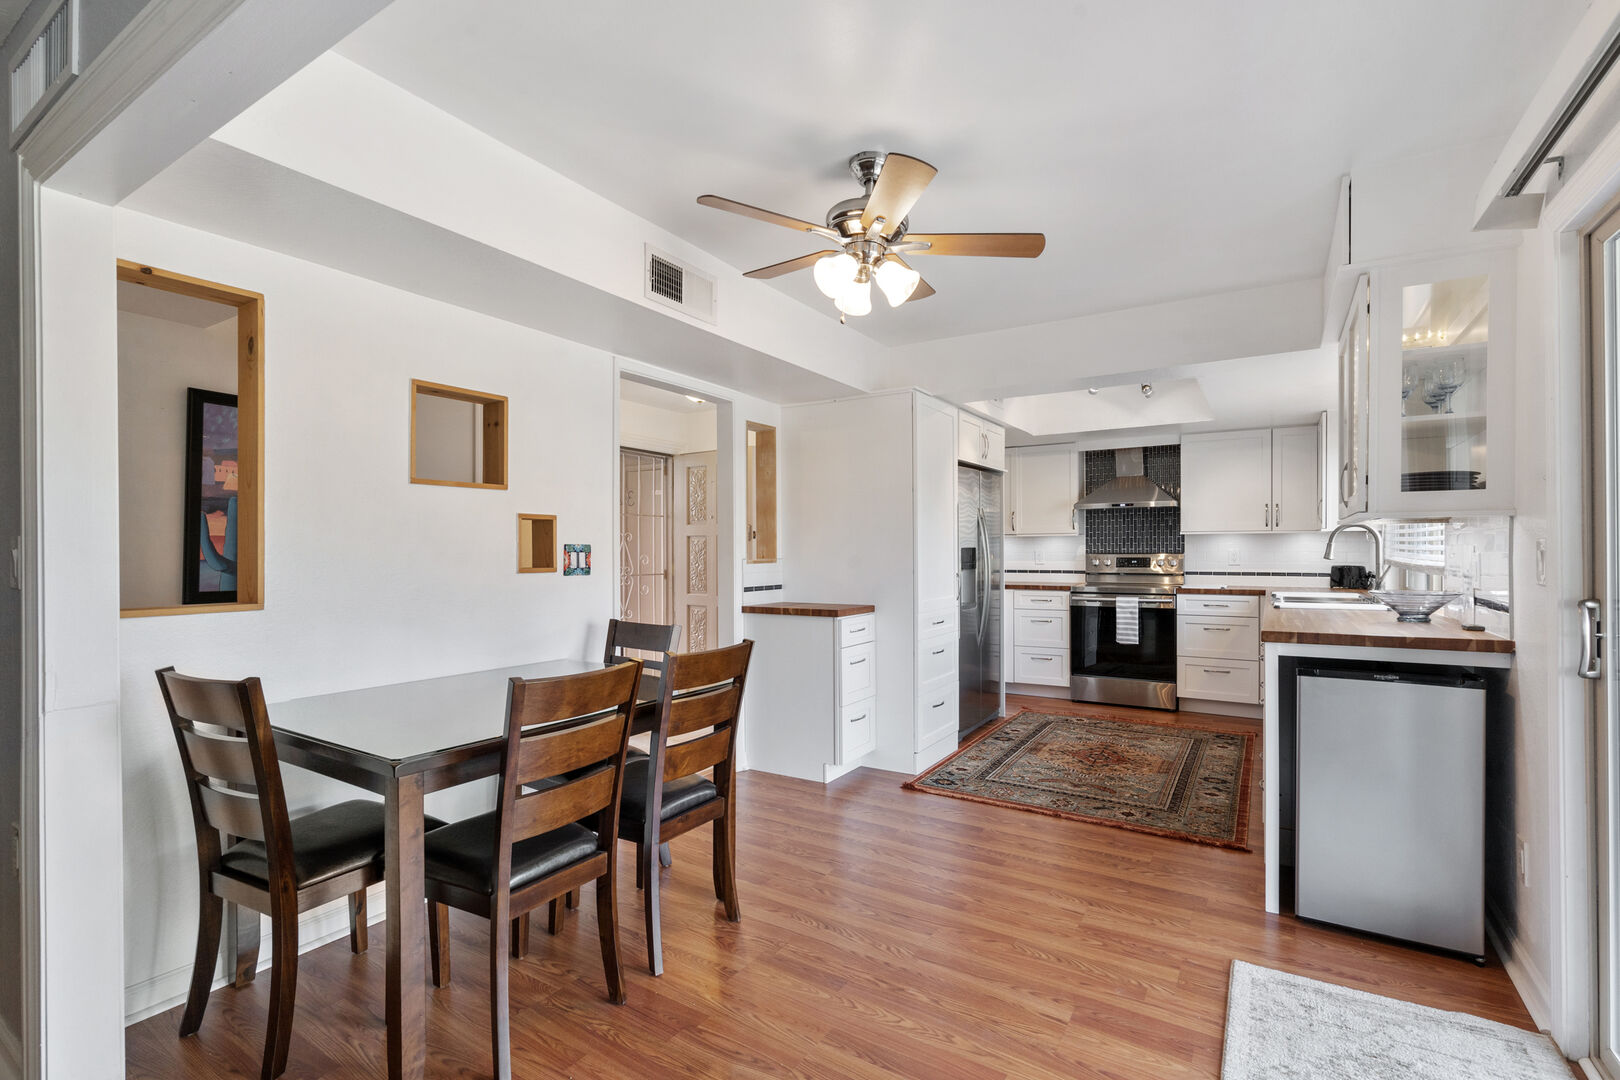 The long and spacious kitchen is a bright and beautiful place to create a meal together.